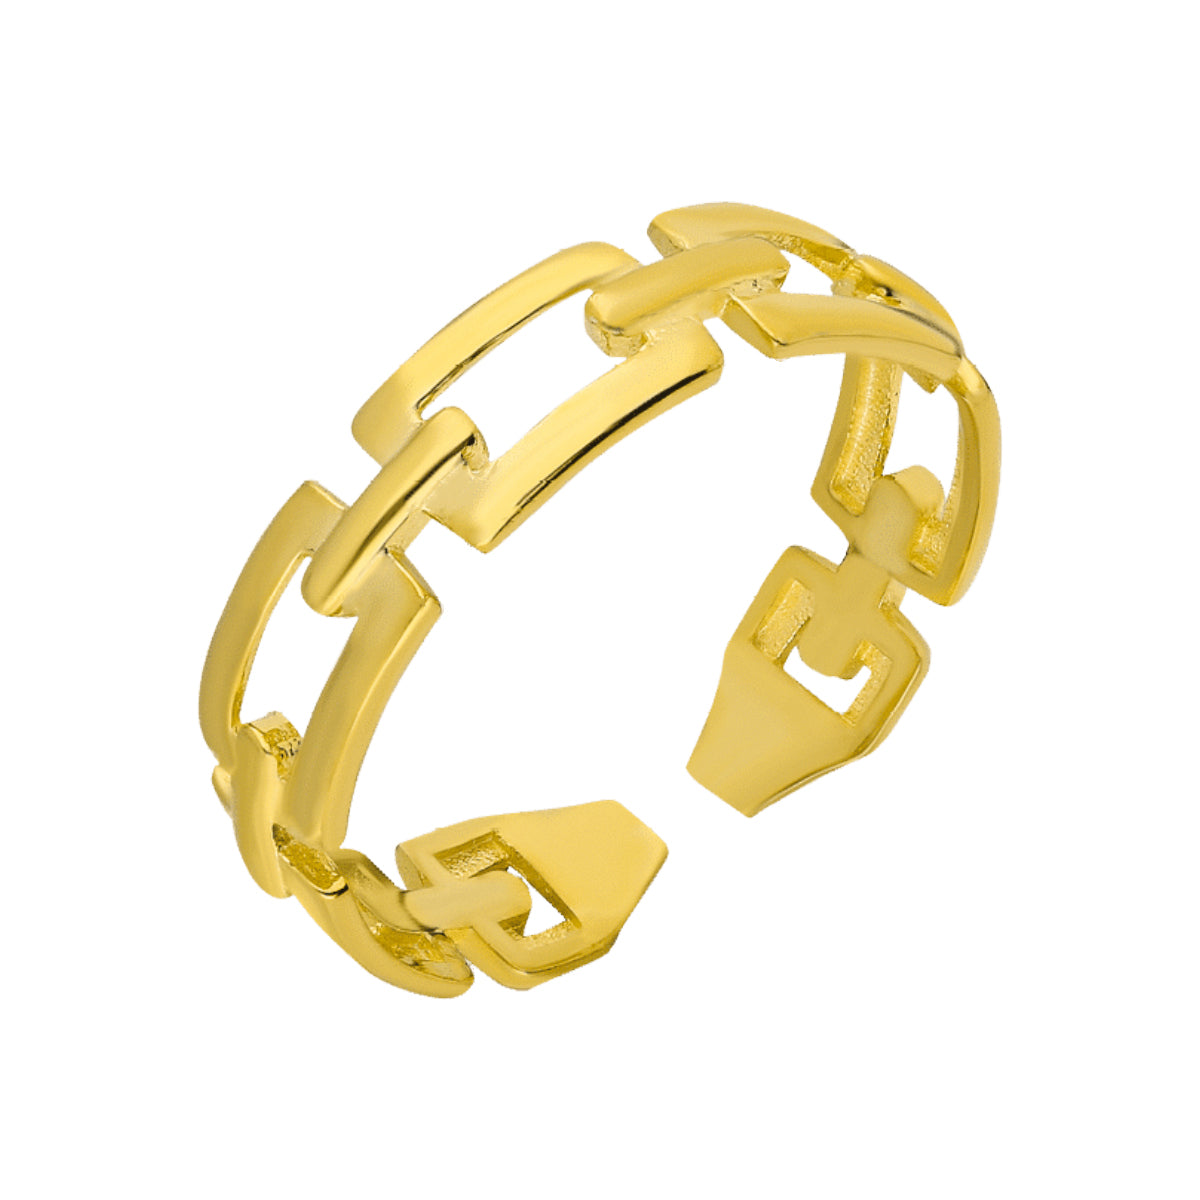 Chain In Ring (6985703096365)